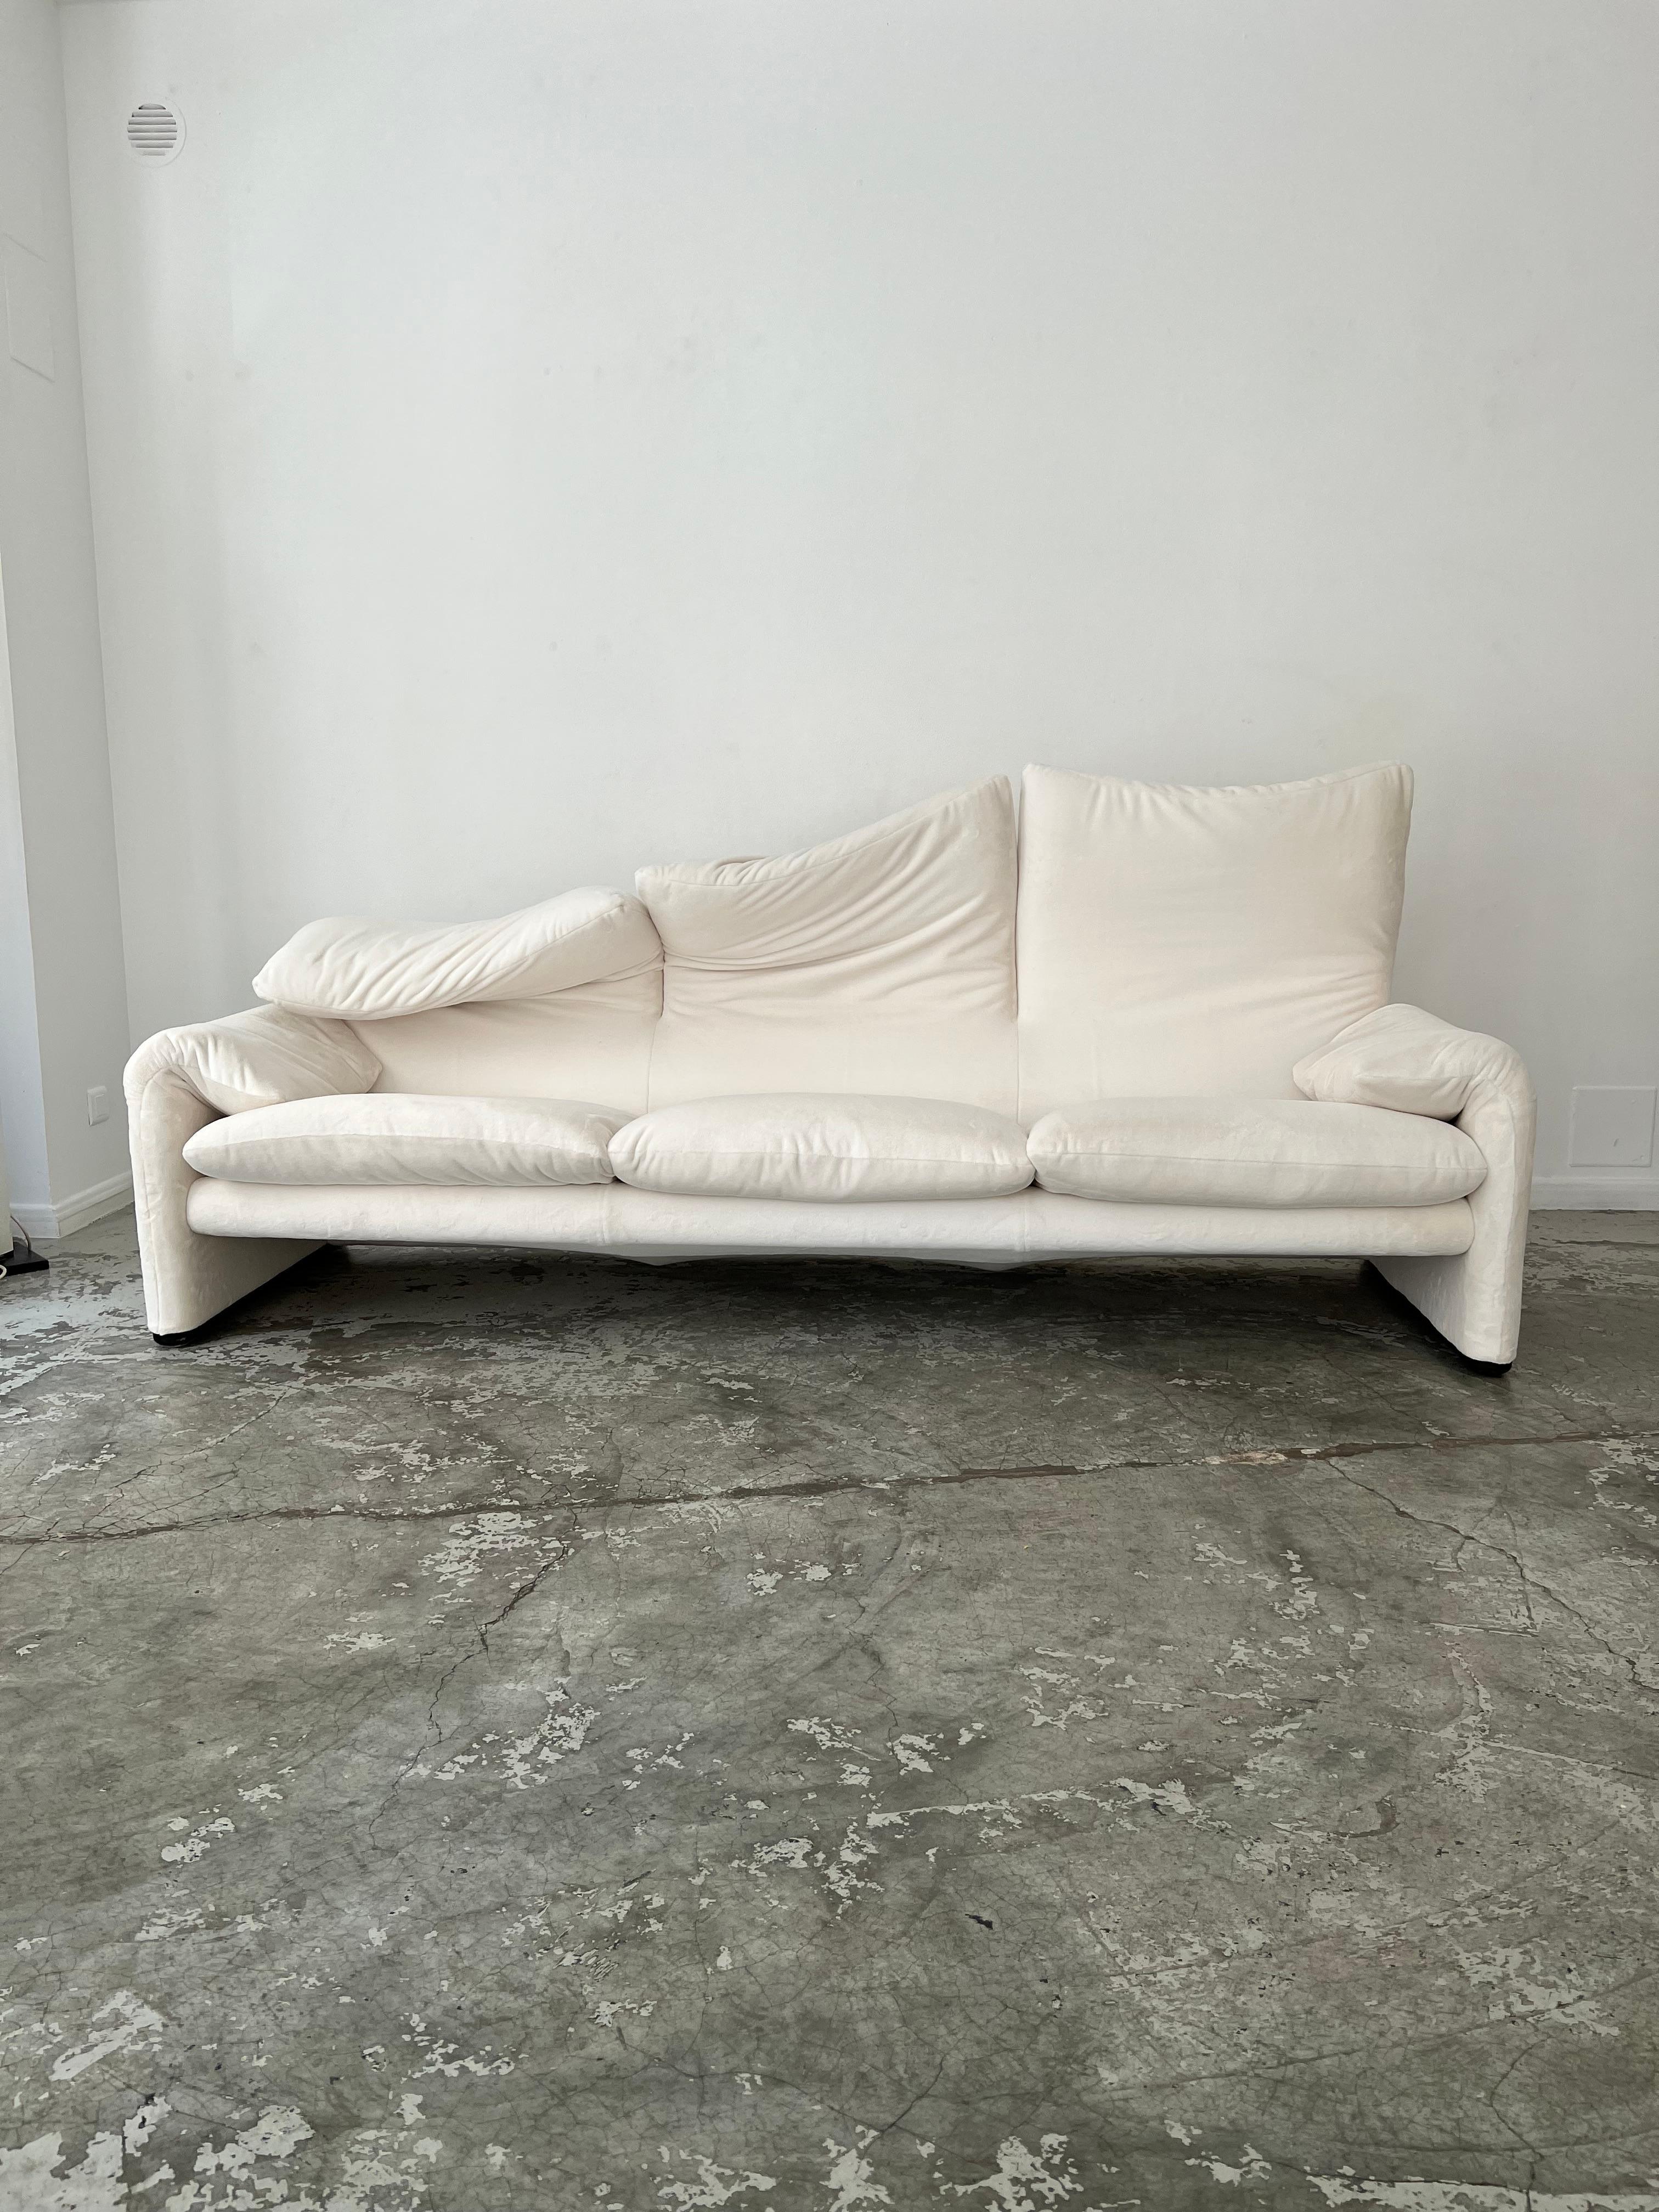 The Maralunga sofa was created in 1973 by Vico Magistretti for the Italian firm Cassina. Known for his creations using simple, essential forms and the use of innovative materials for that time, he engaged in numerous partnerships with the new